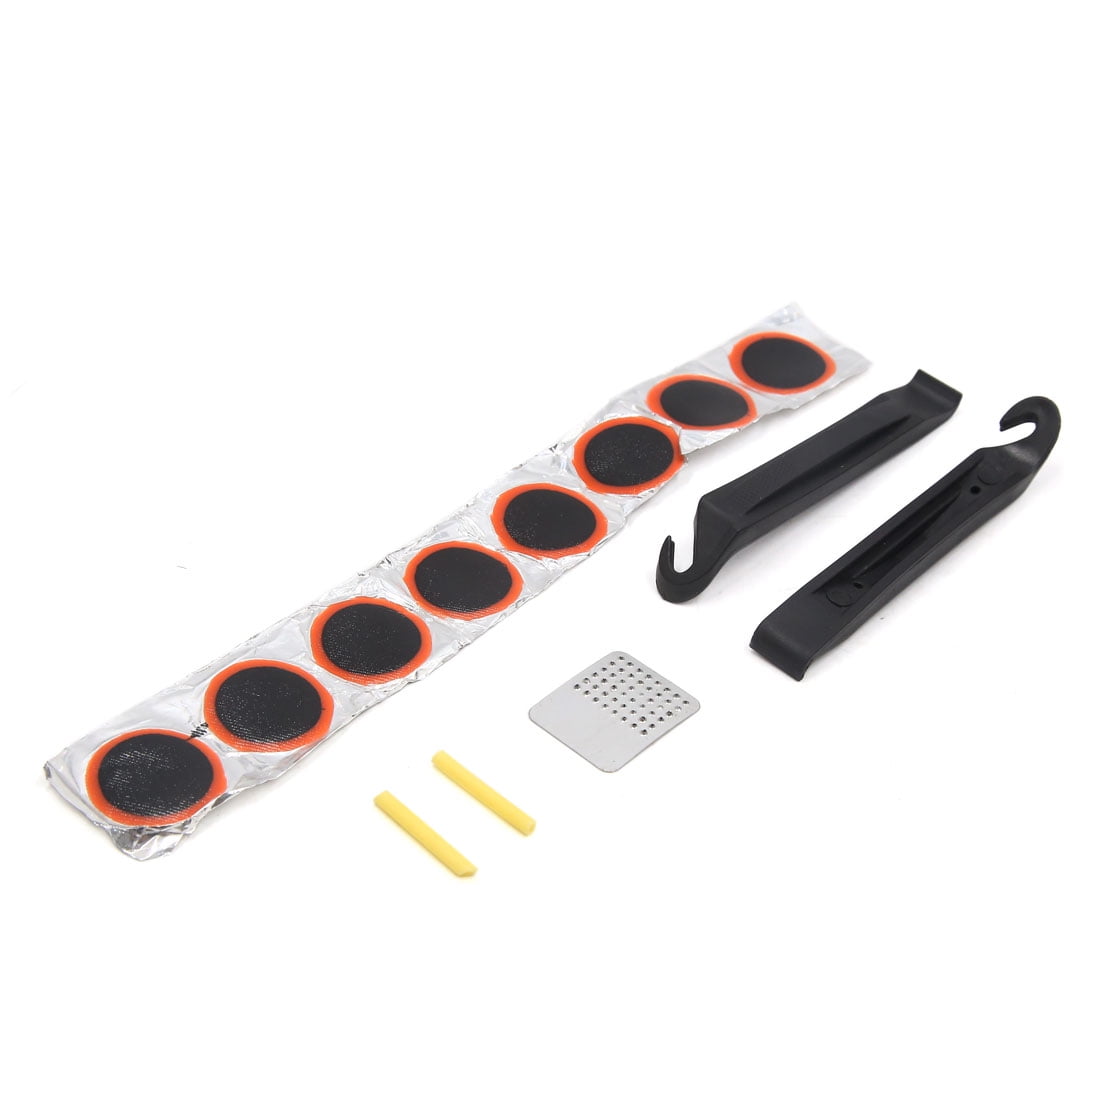 Portable Bicycle Bike Tire Repair Kits Tools Patch Equipment Rubber' C2W8 